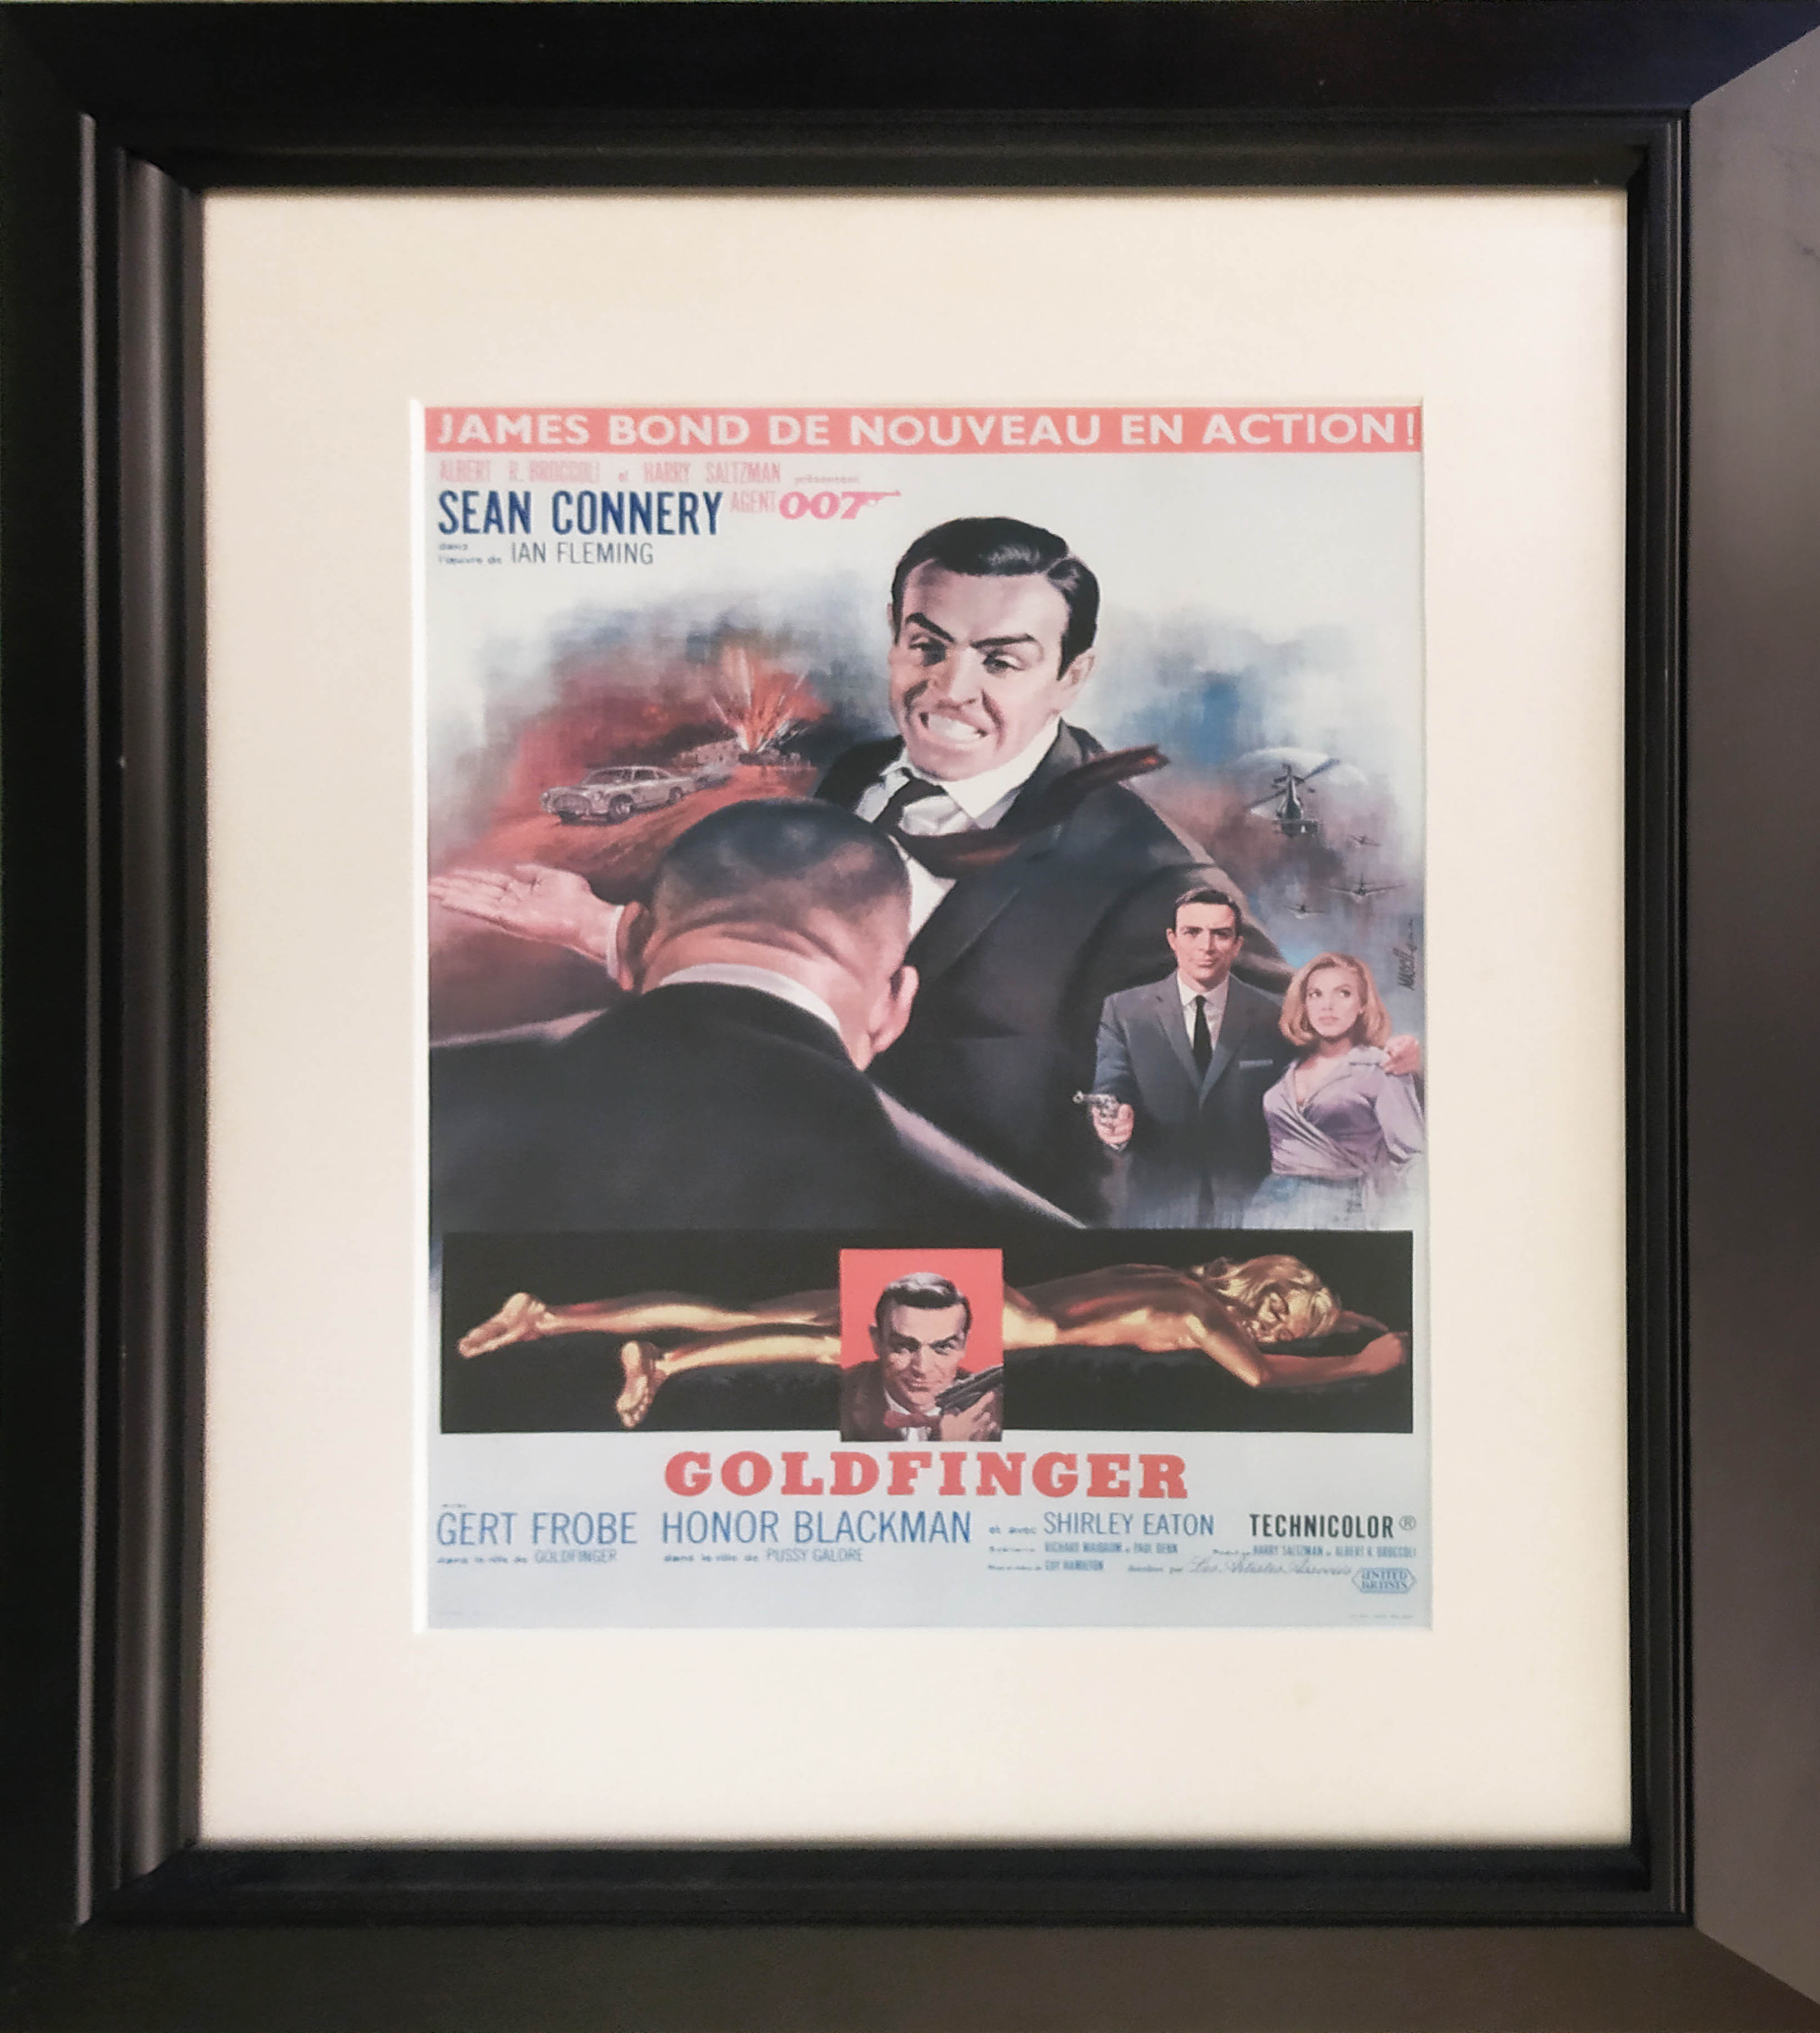 JAMES BOND, united artists MGM & Eon productions 'reproduction offset lithographic film posters',